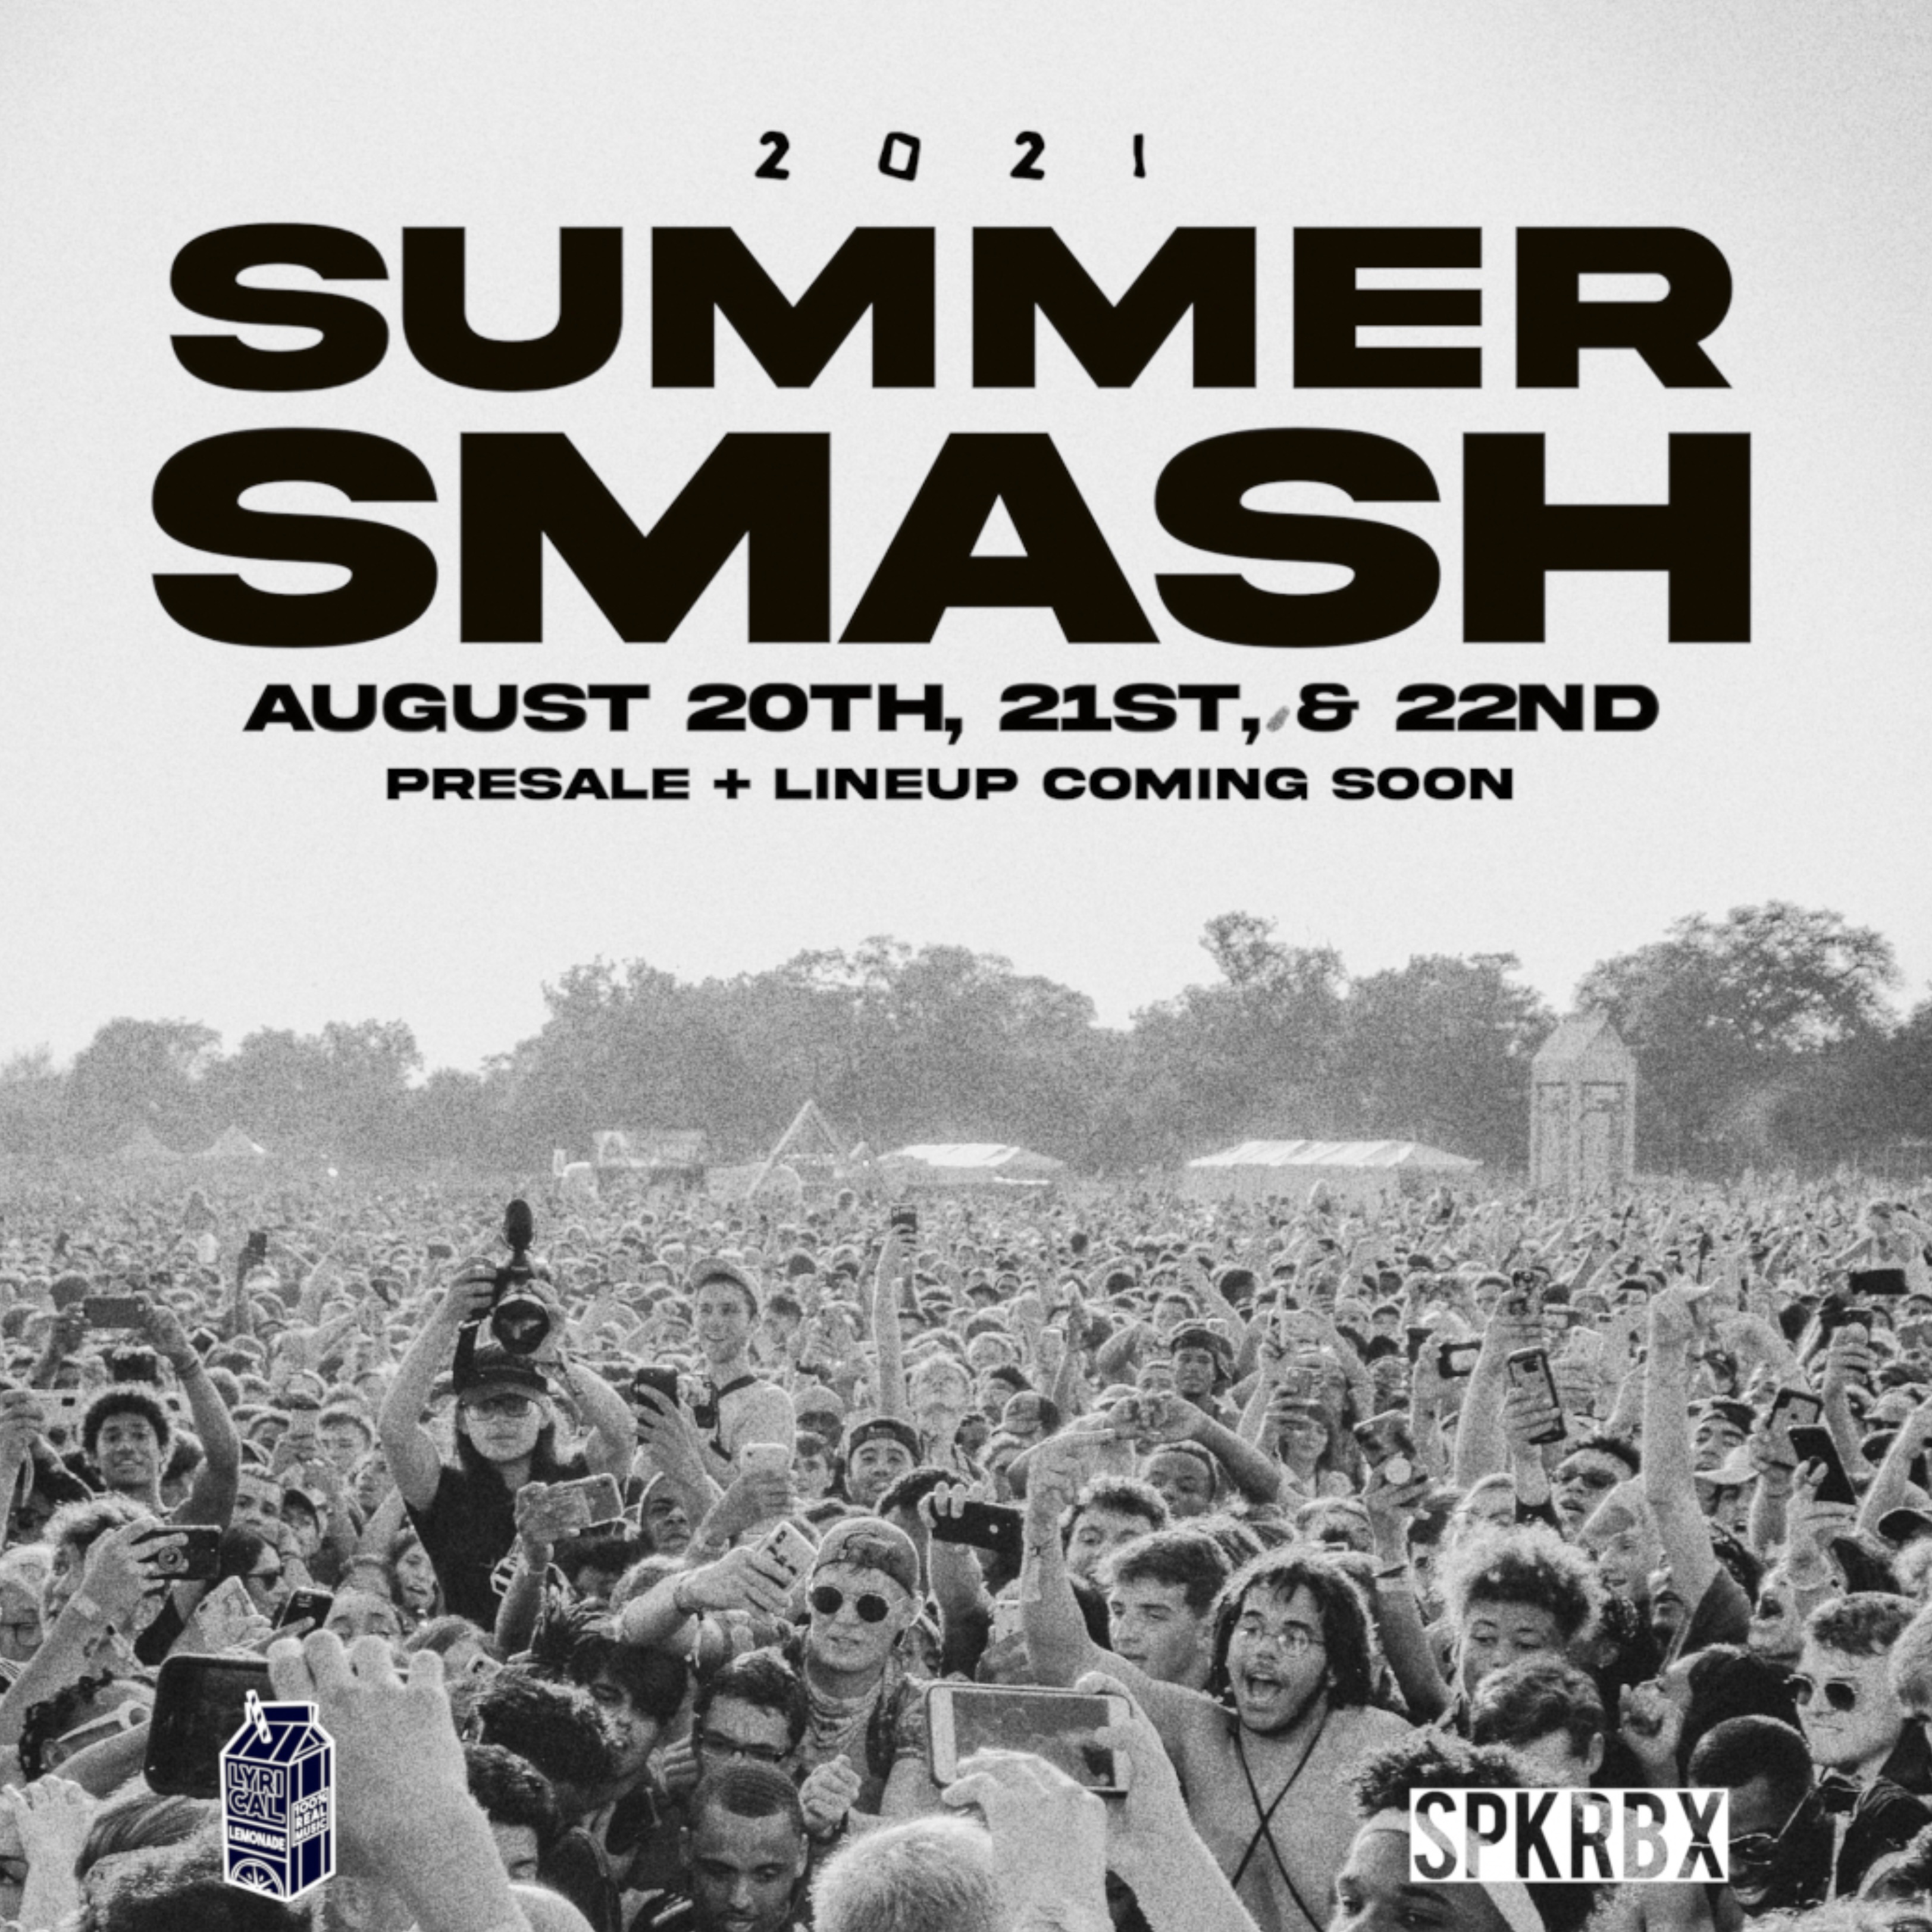 Buy Tickets to The Summer Smash Festival 2021 in Chicago on Aug 20, 2021 -  Aug 22,2021